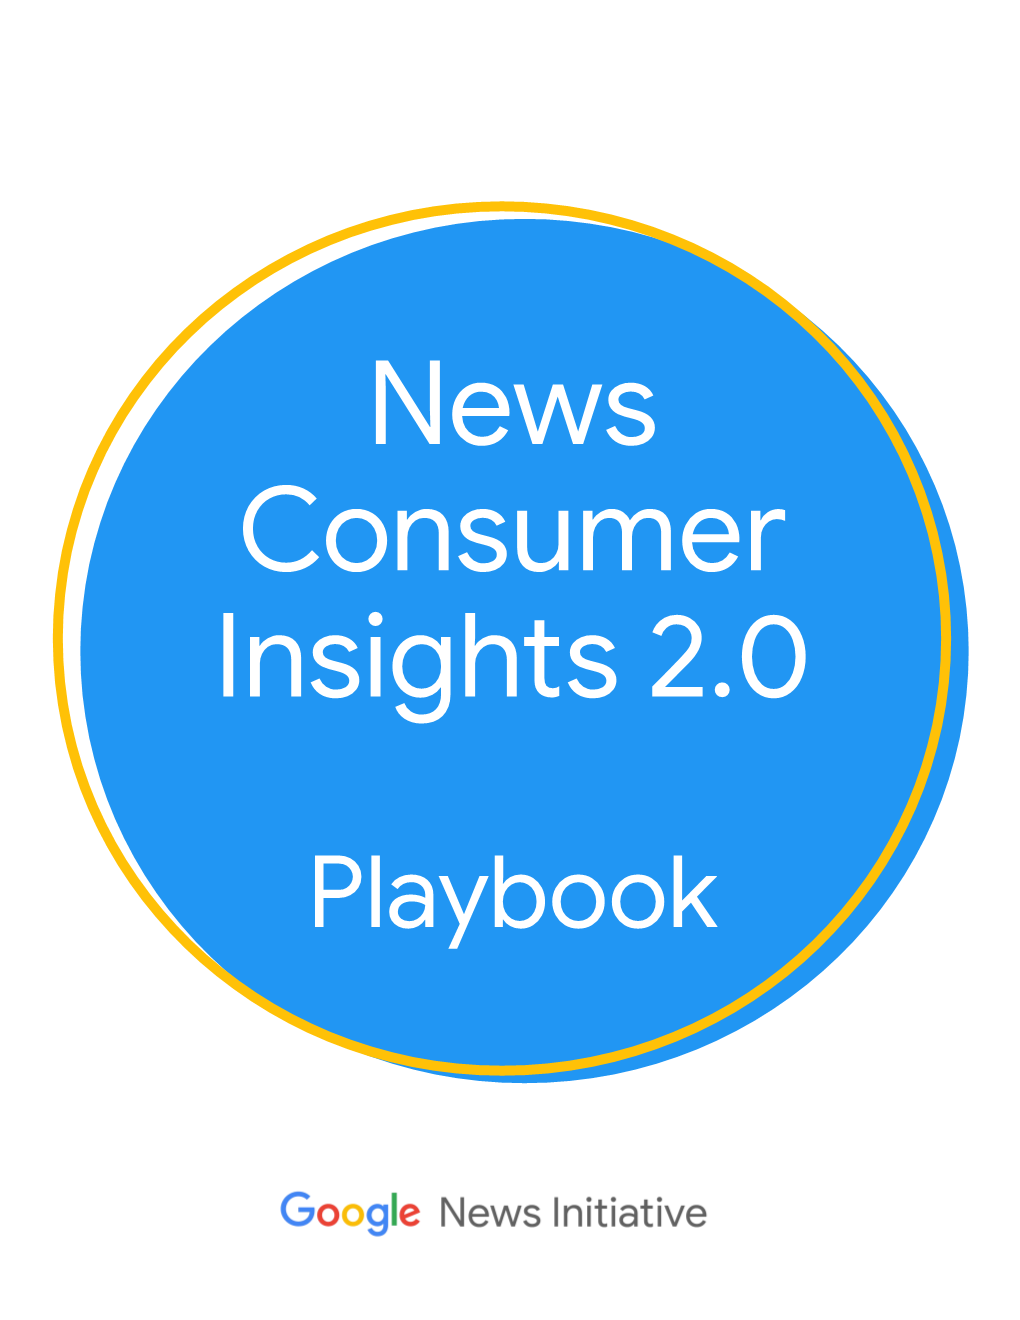 NCI Playbook Had Great Feedback, but It’S a Long Read If You Want to Quickly Act on Insights